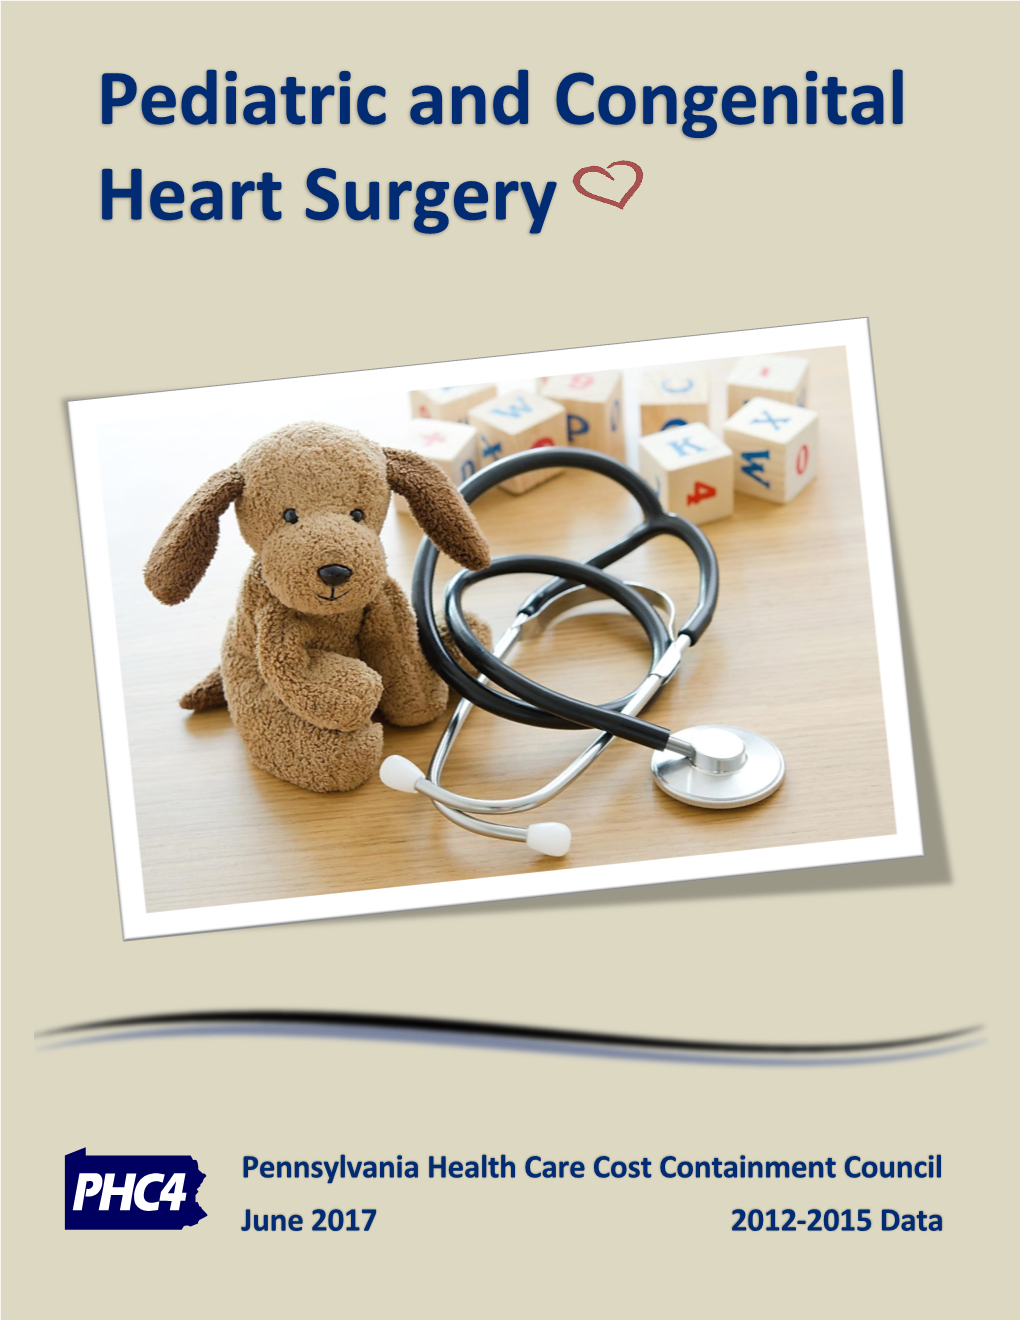 Report on Pediatric and Congenital Heart Surgery